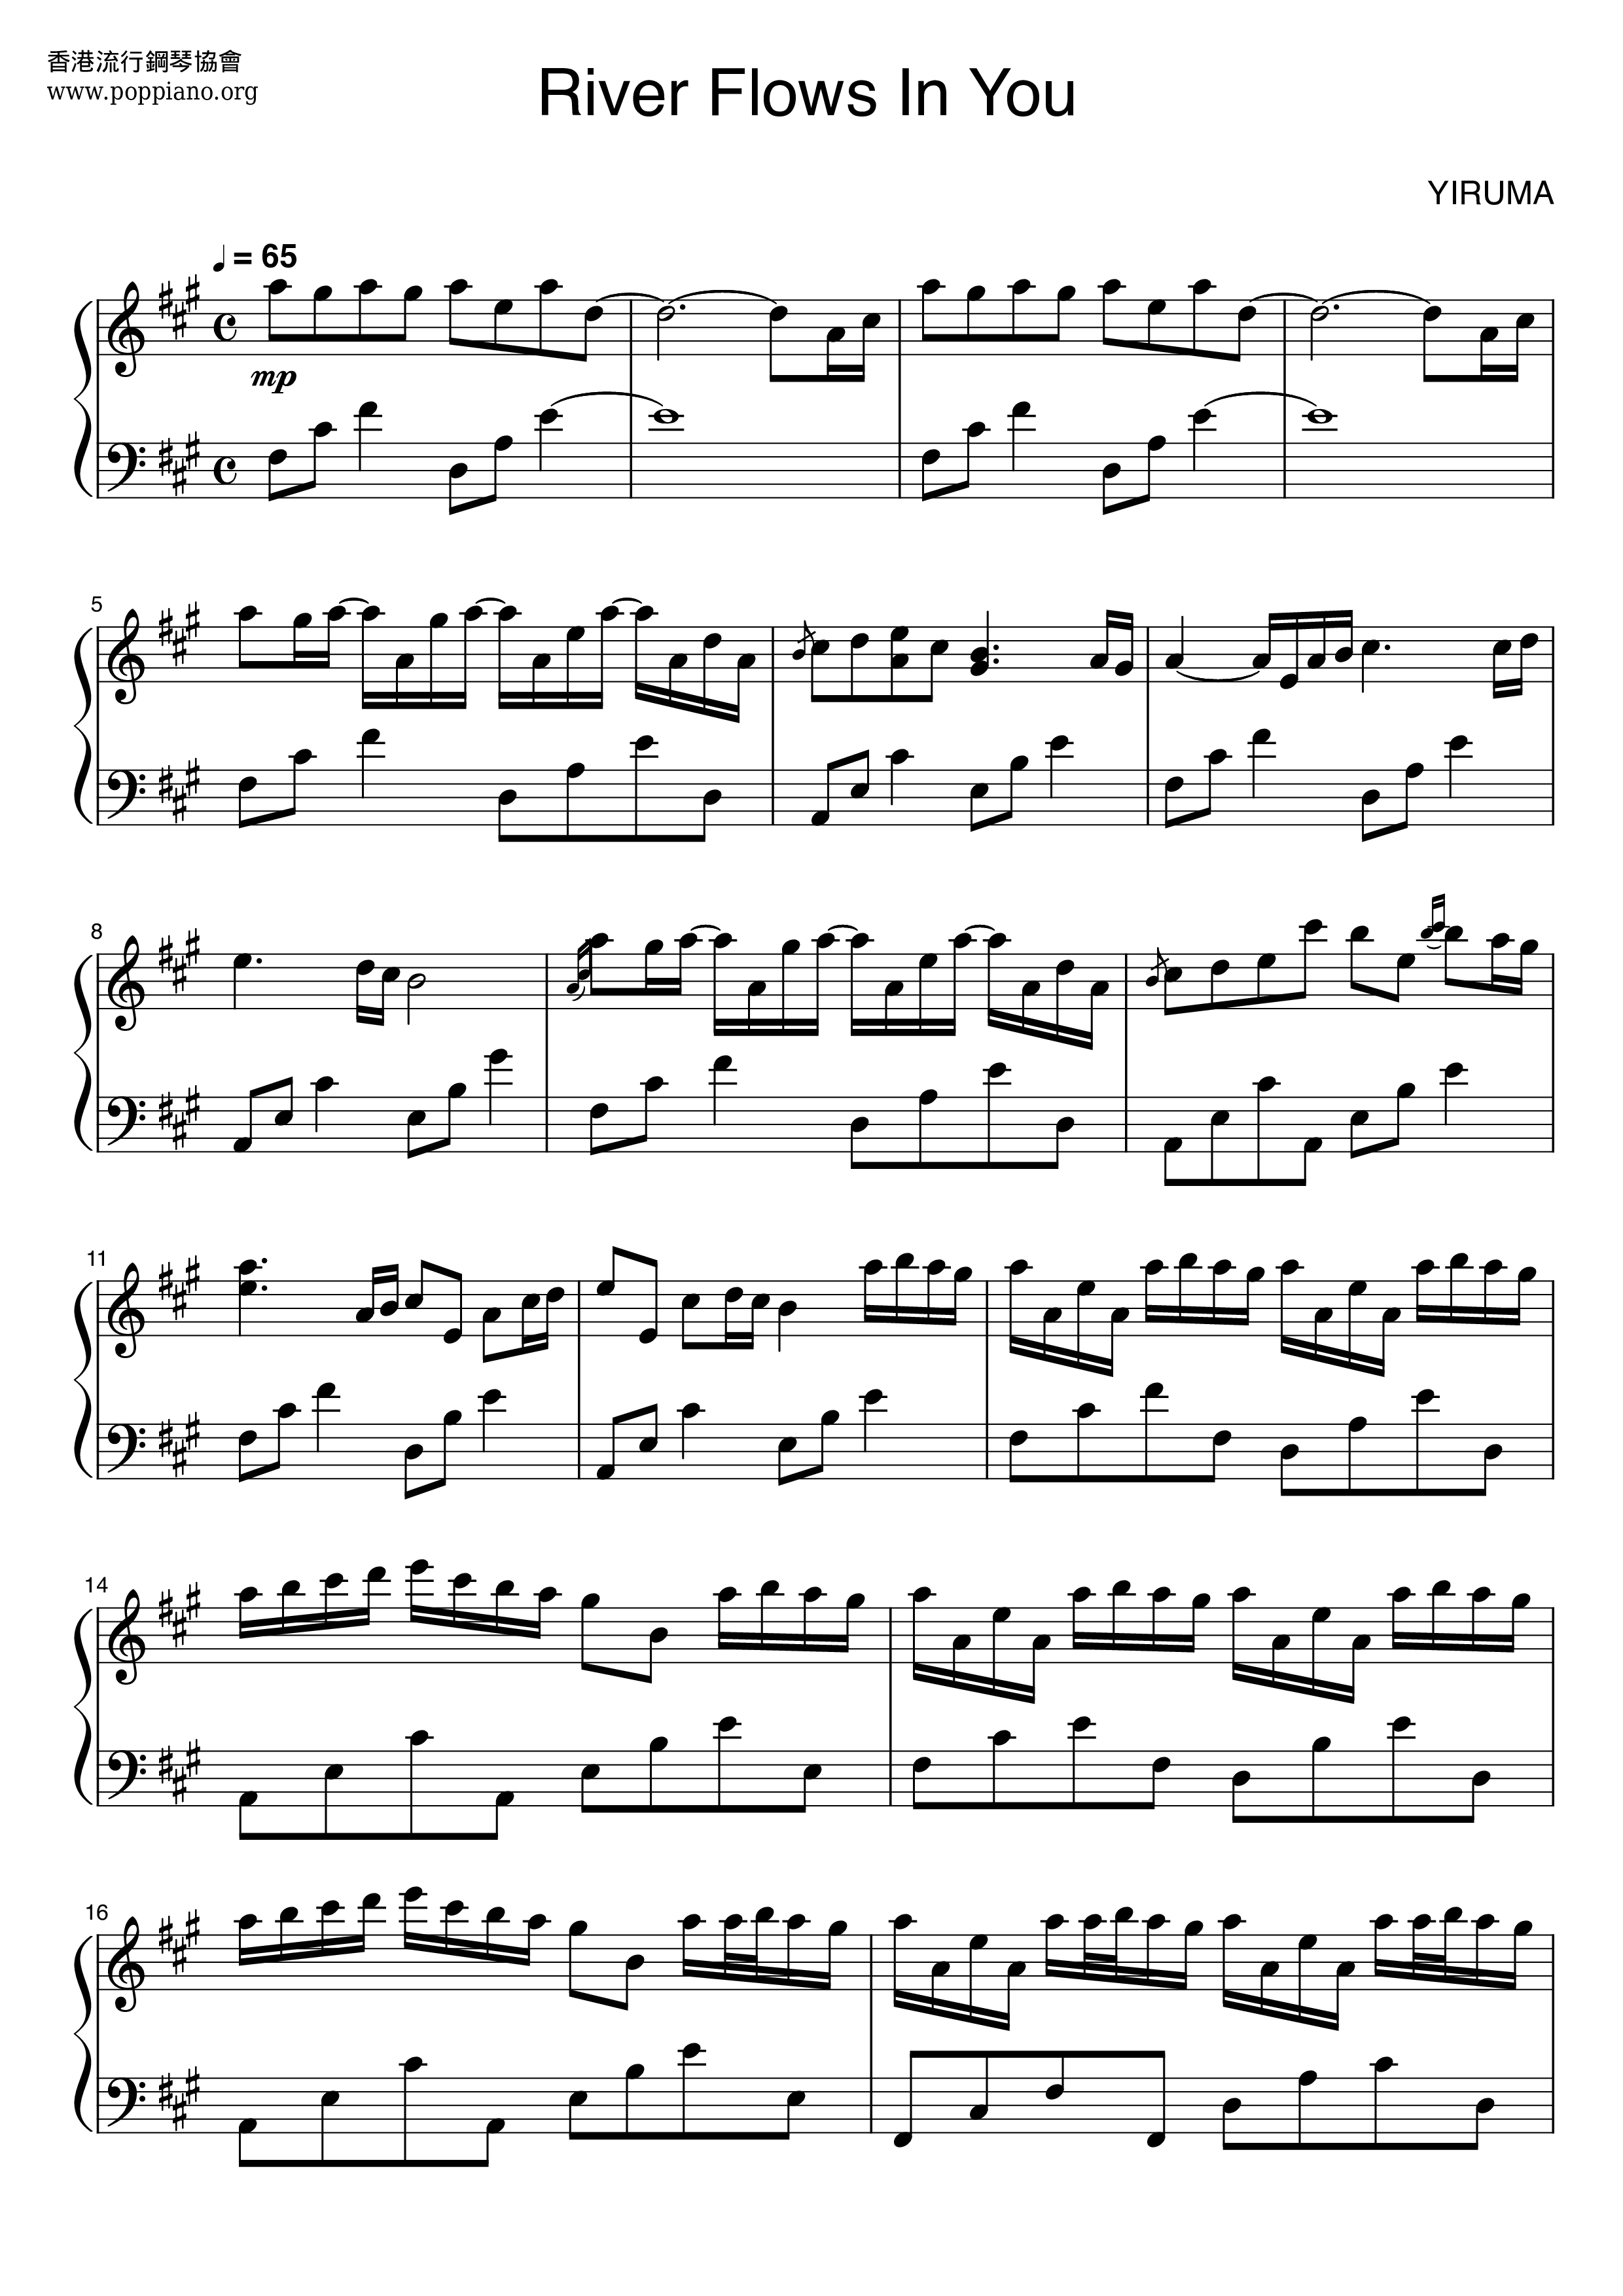 River Flows In Youall Versions Sheet Music Piano Score Free Pdf Download Hk Pop Piano Academy